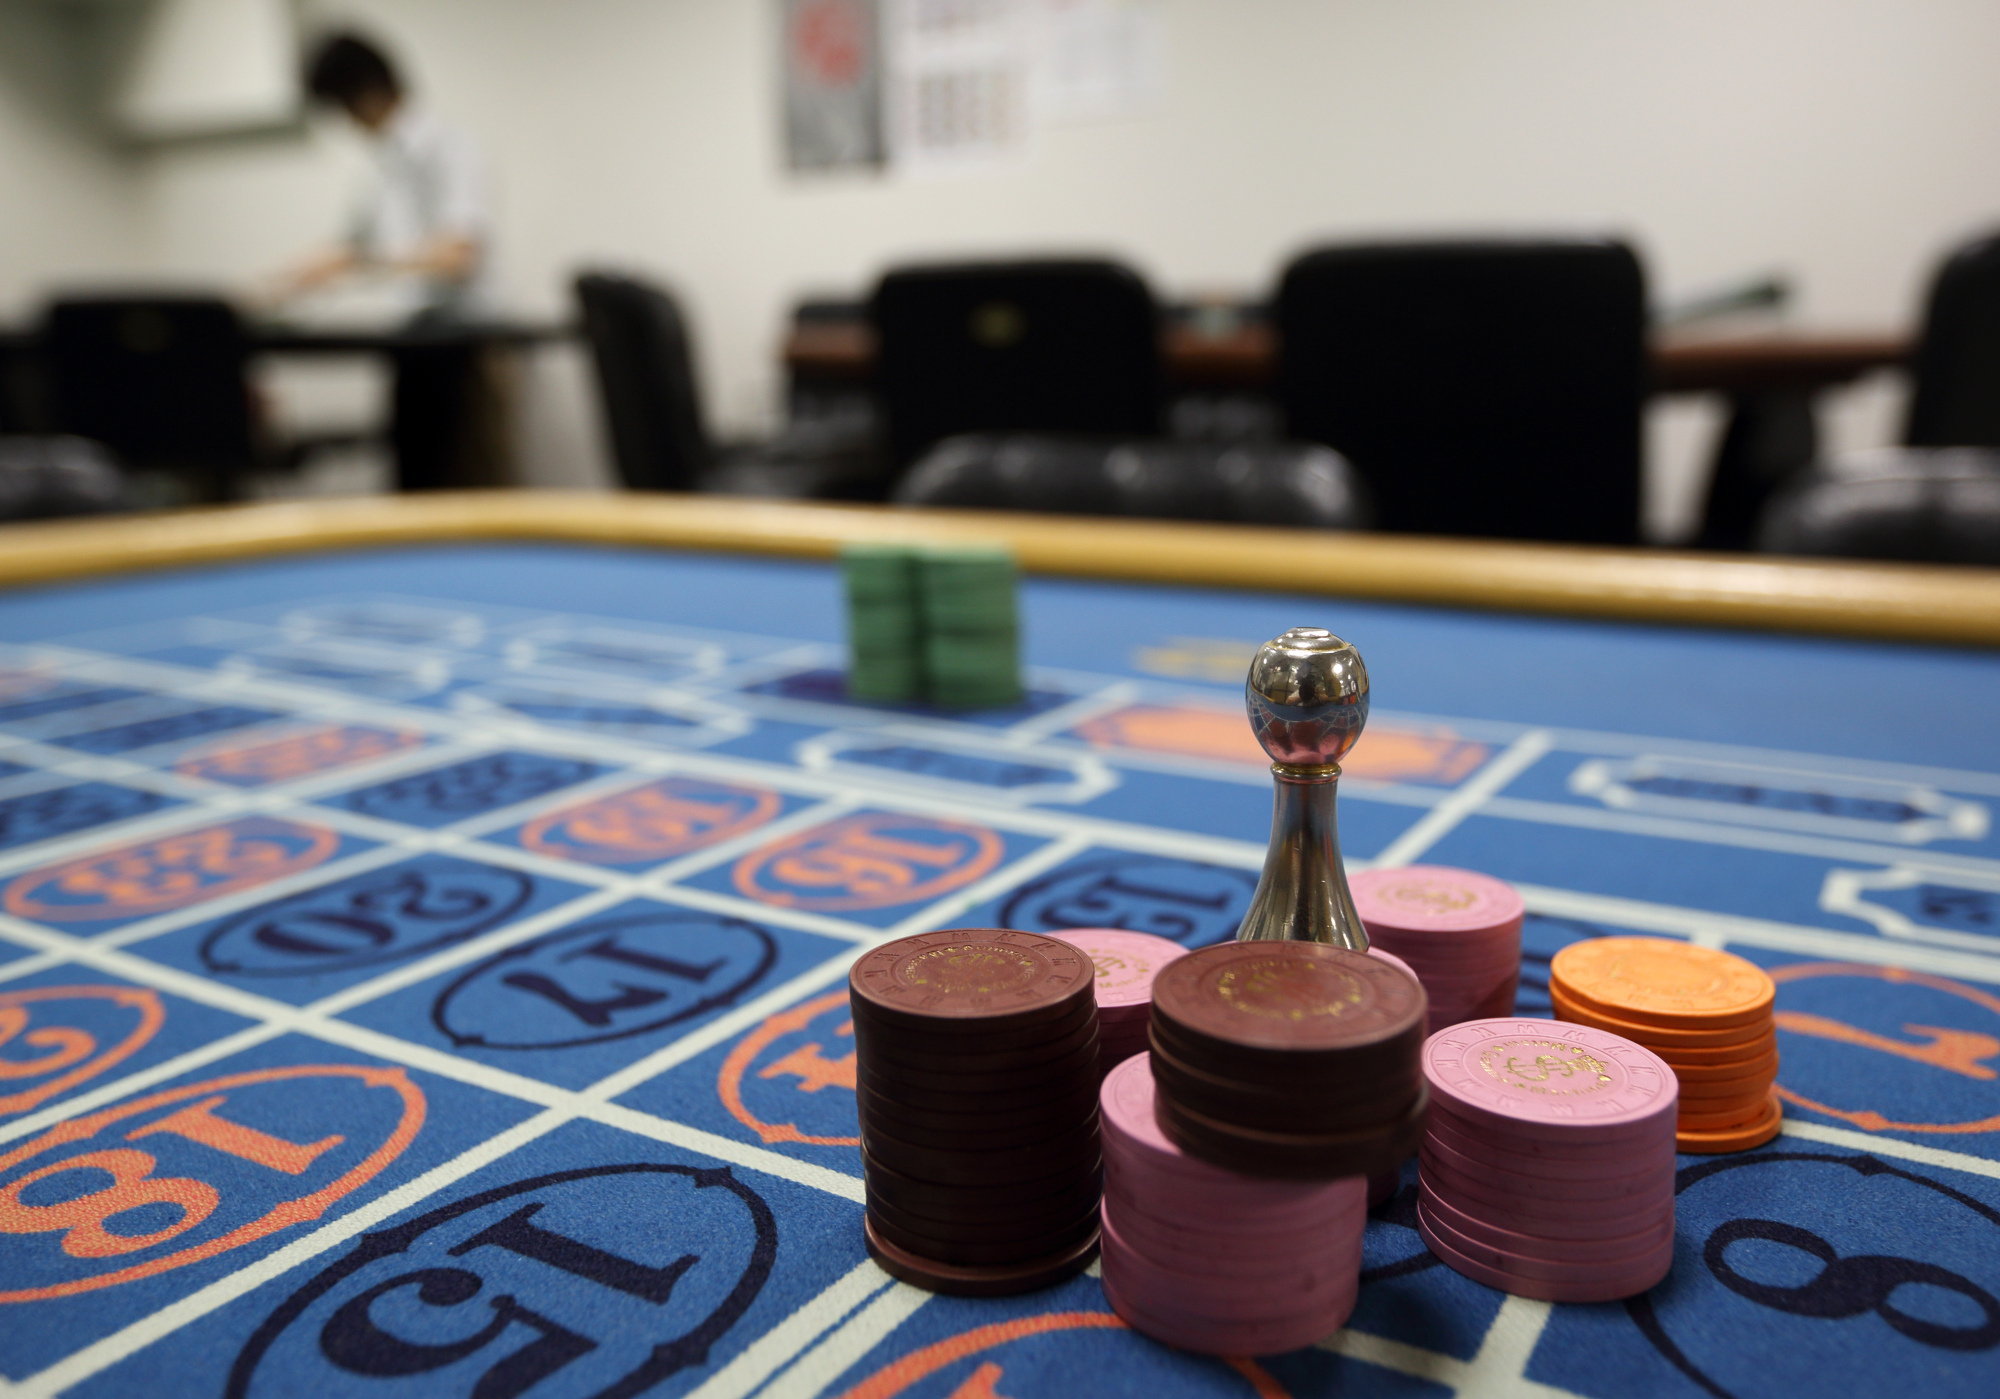 Easy money: It's easy to imagine that gambling resorts in Japan will be attractive targets for organized crime. | BLOOMBERG